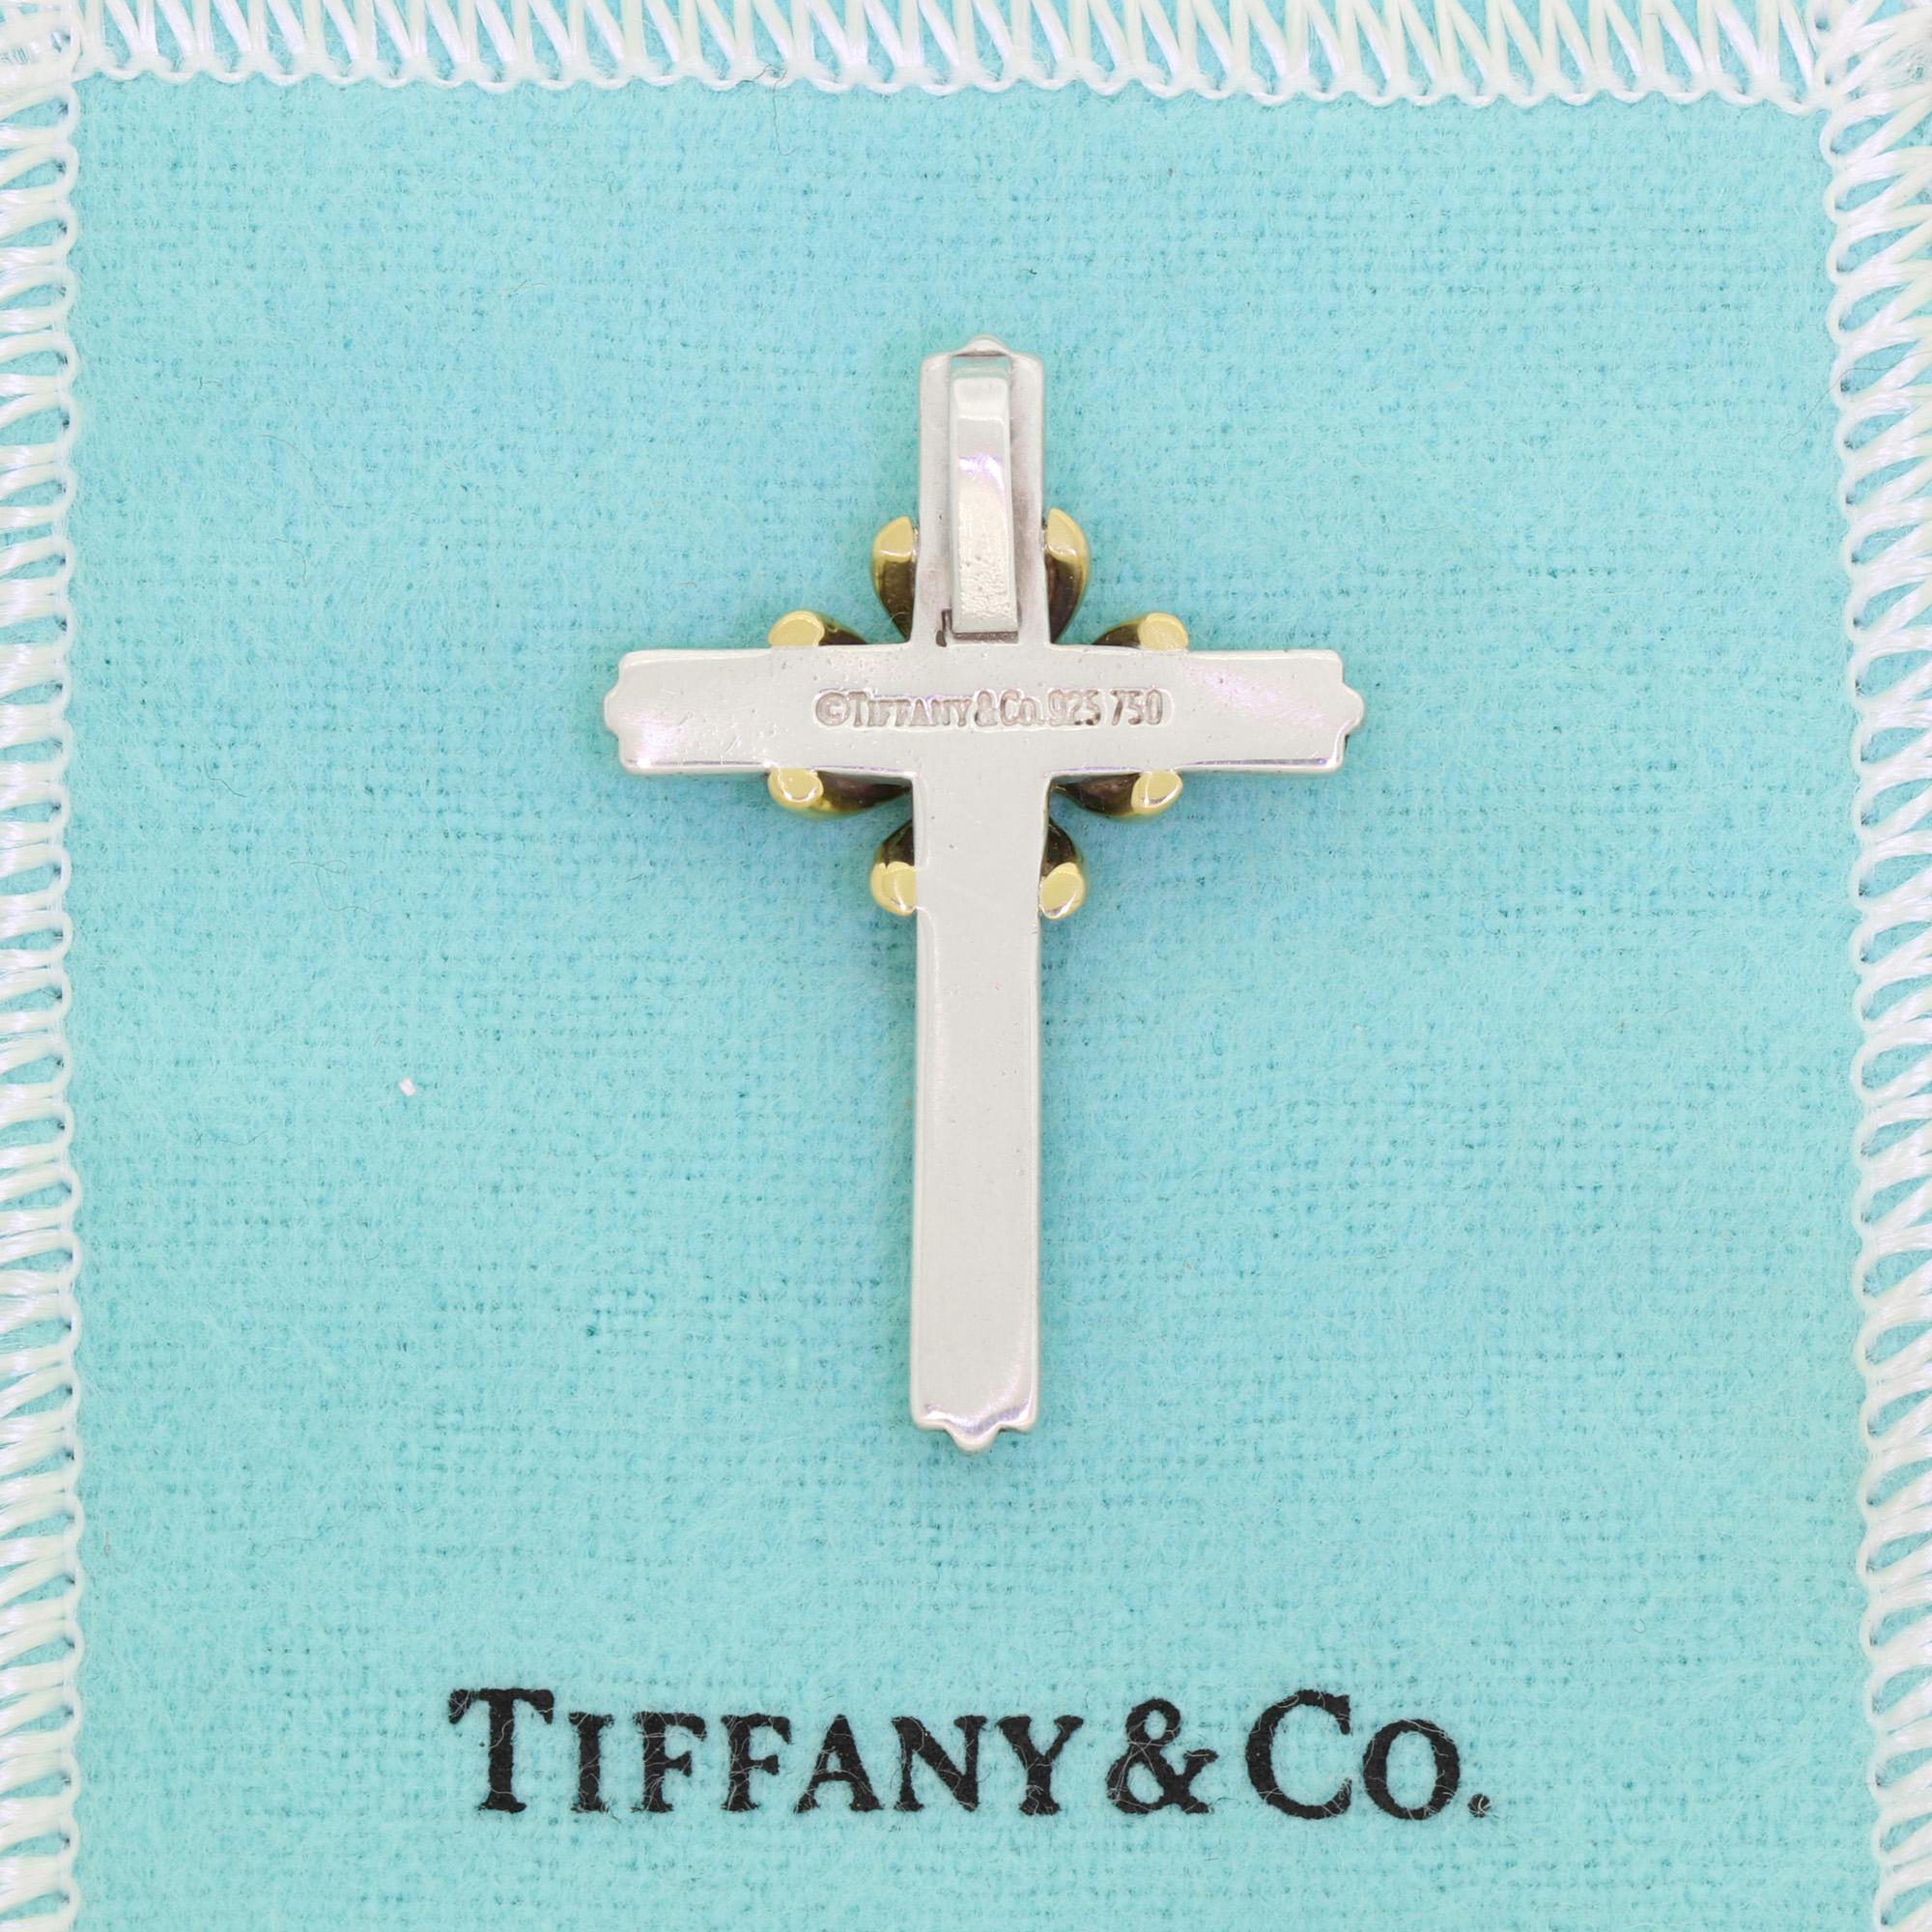 This stunning Tiffany & Co cross pendant is crafted from 18K yellow gold and fine sterling silver. Featuring an ornate ridged design of the finest craftsmanship, this is a truly beautiful way to display your faith. The central gold accent provides a